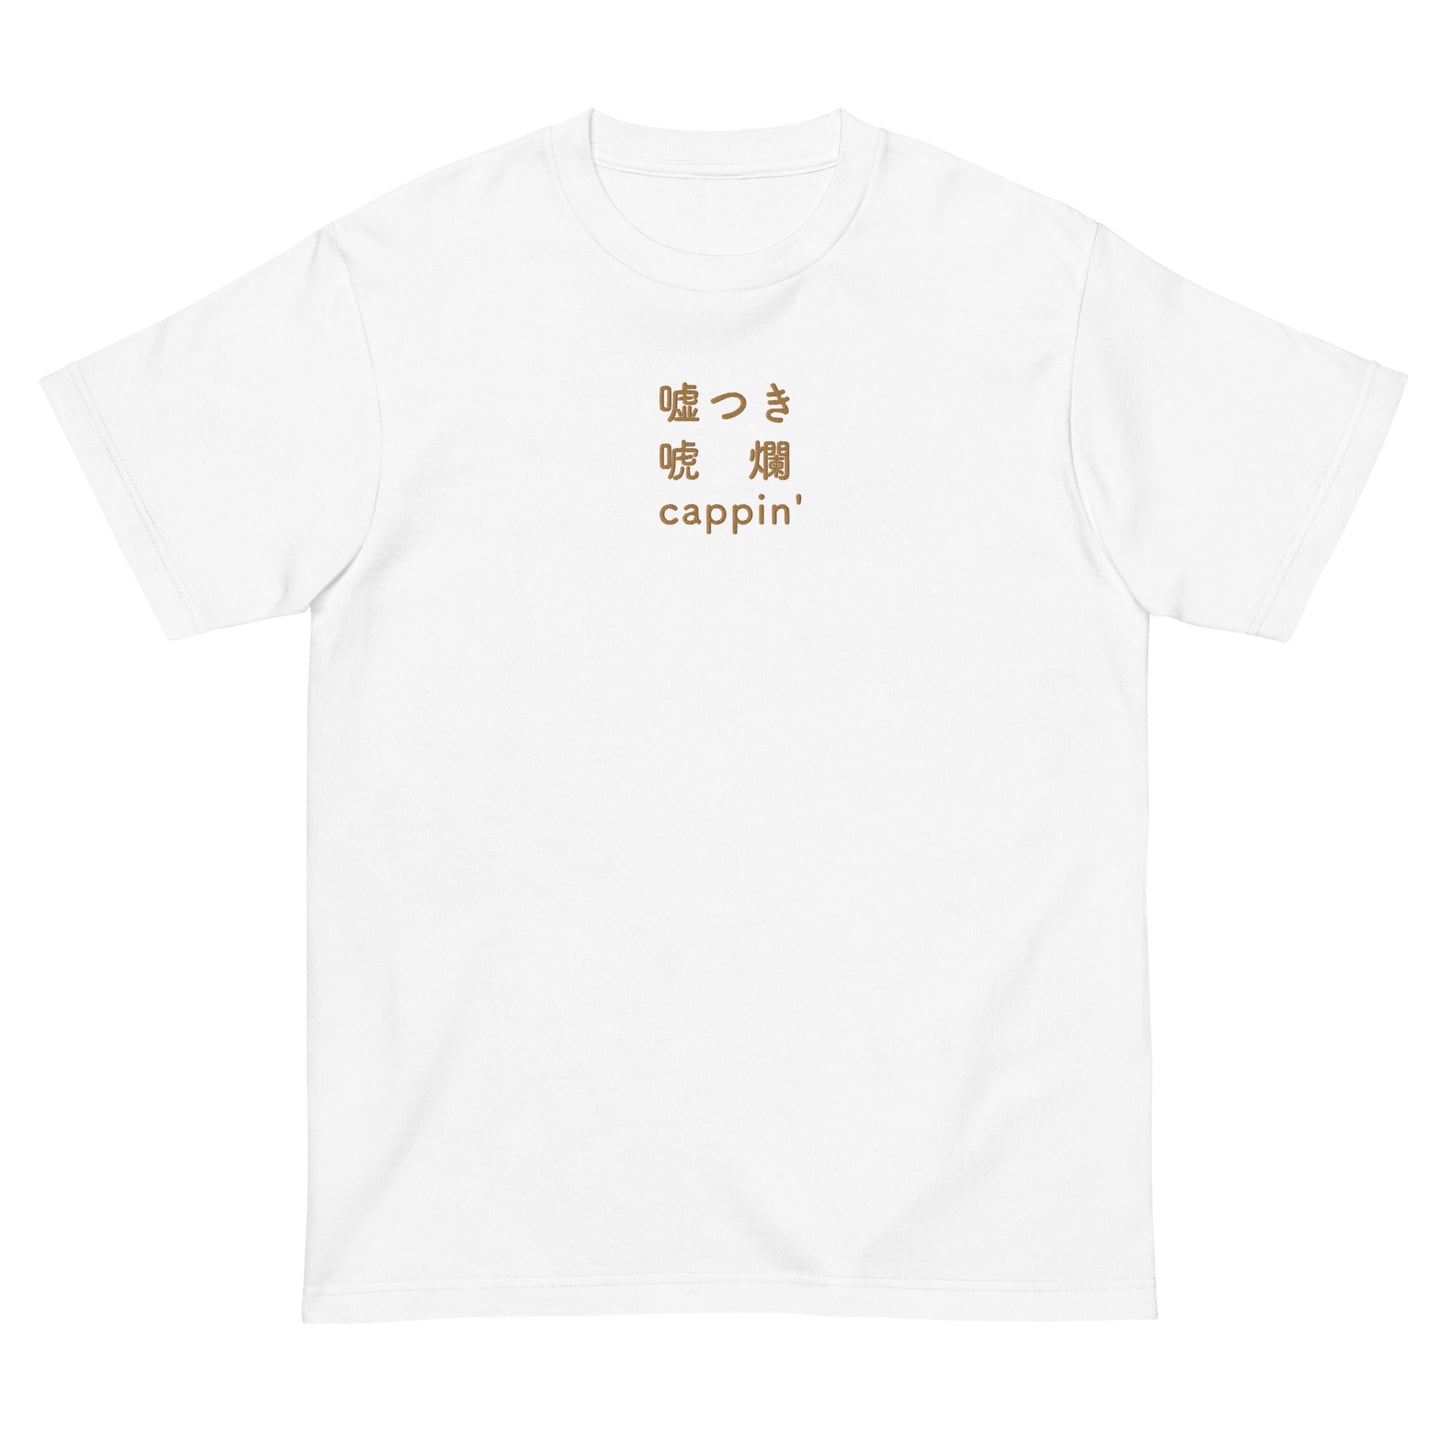 White High Quality Tee - Front Design with an Brown Embroidery "Cappin'" in Japanese,Chinese and English